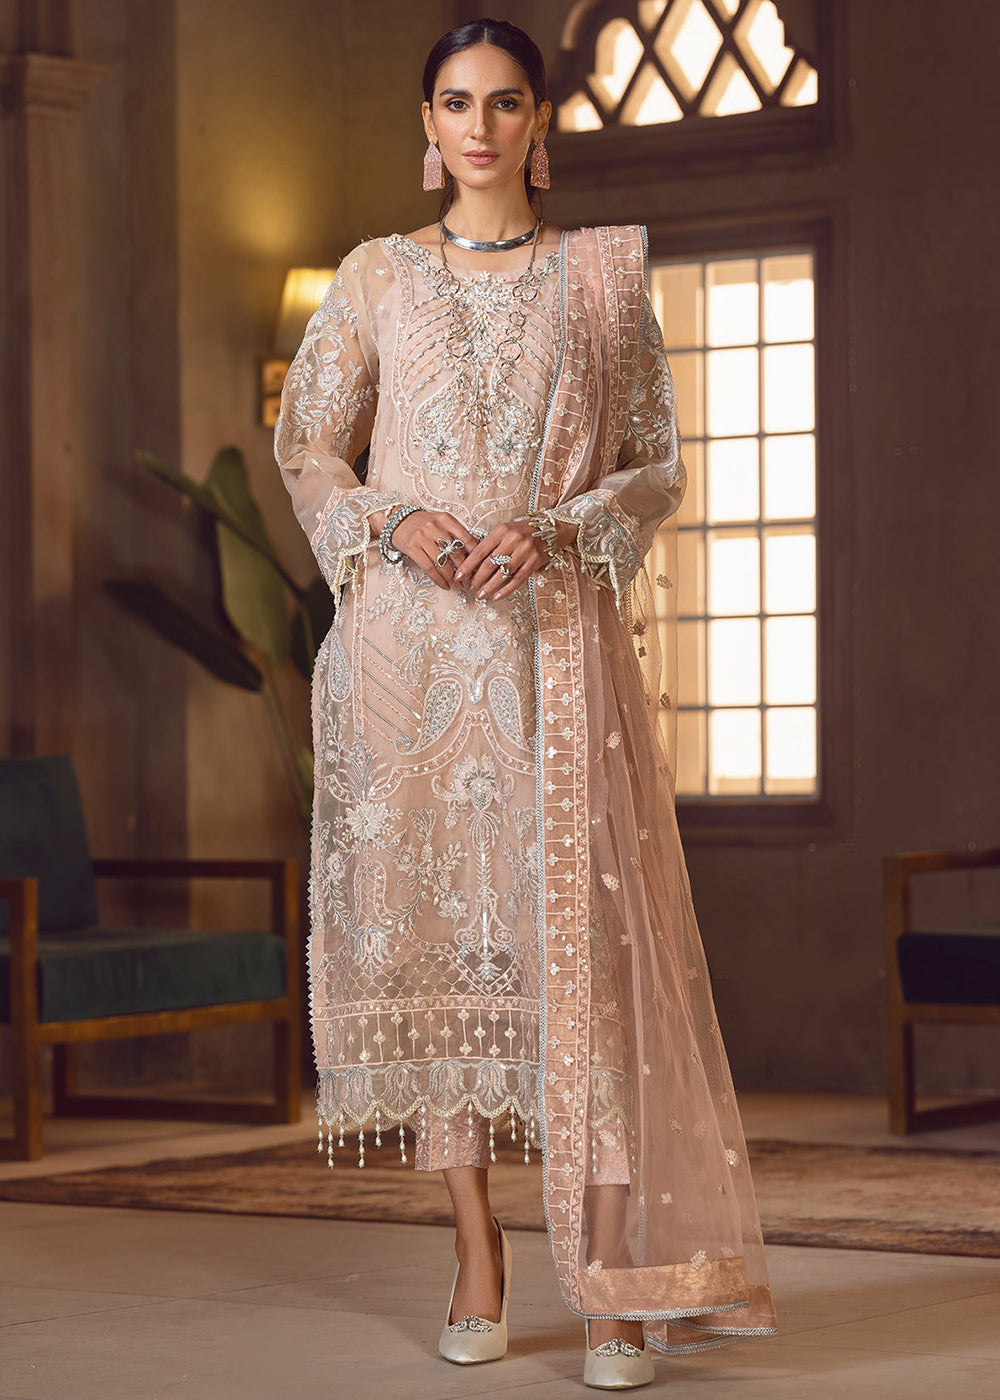 Buy Now Pink Pakistani Organza Suit | Emaan Adeel | Le Festa Formal Edit 7 | LF-702 Online in USA, UK, Canada & Worldwide at Empress Clothing. 